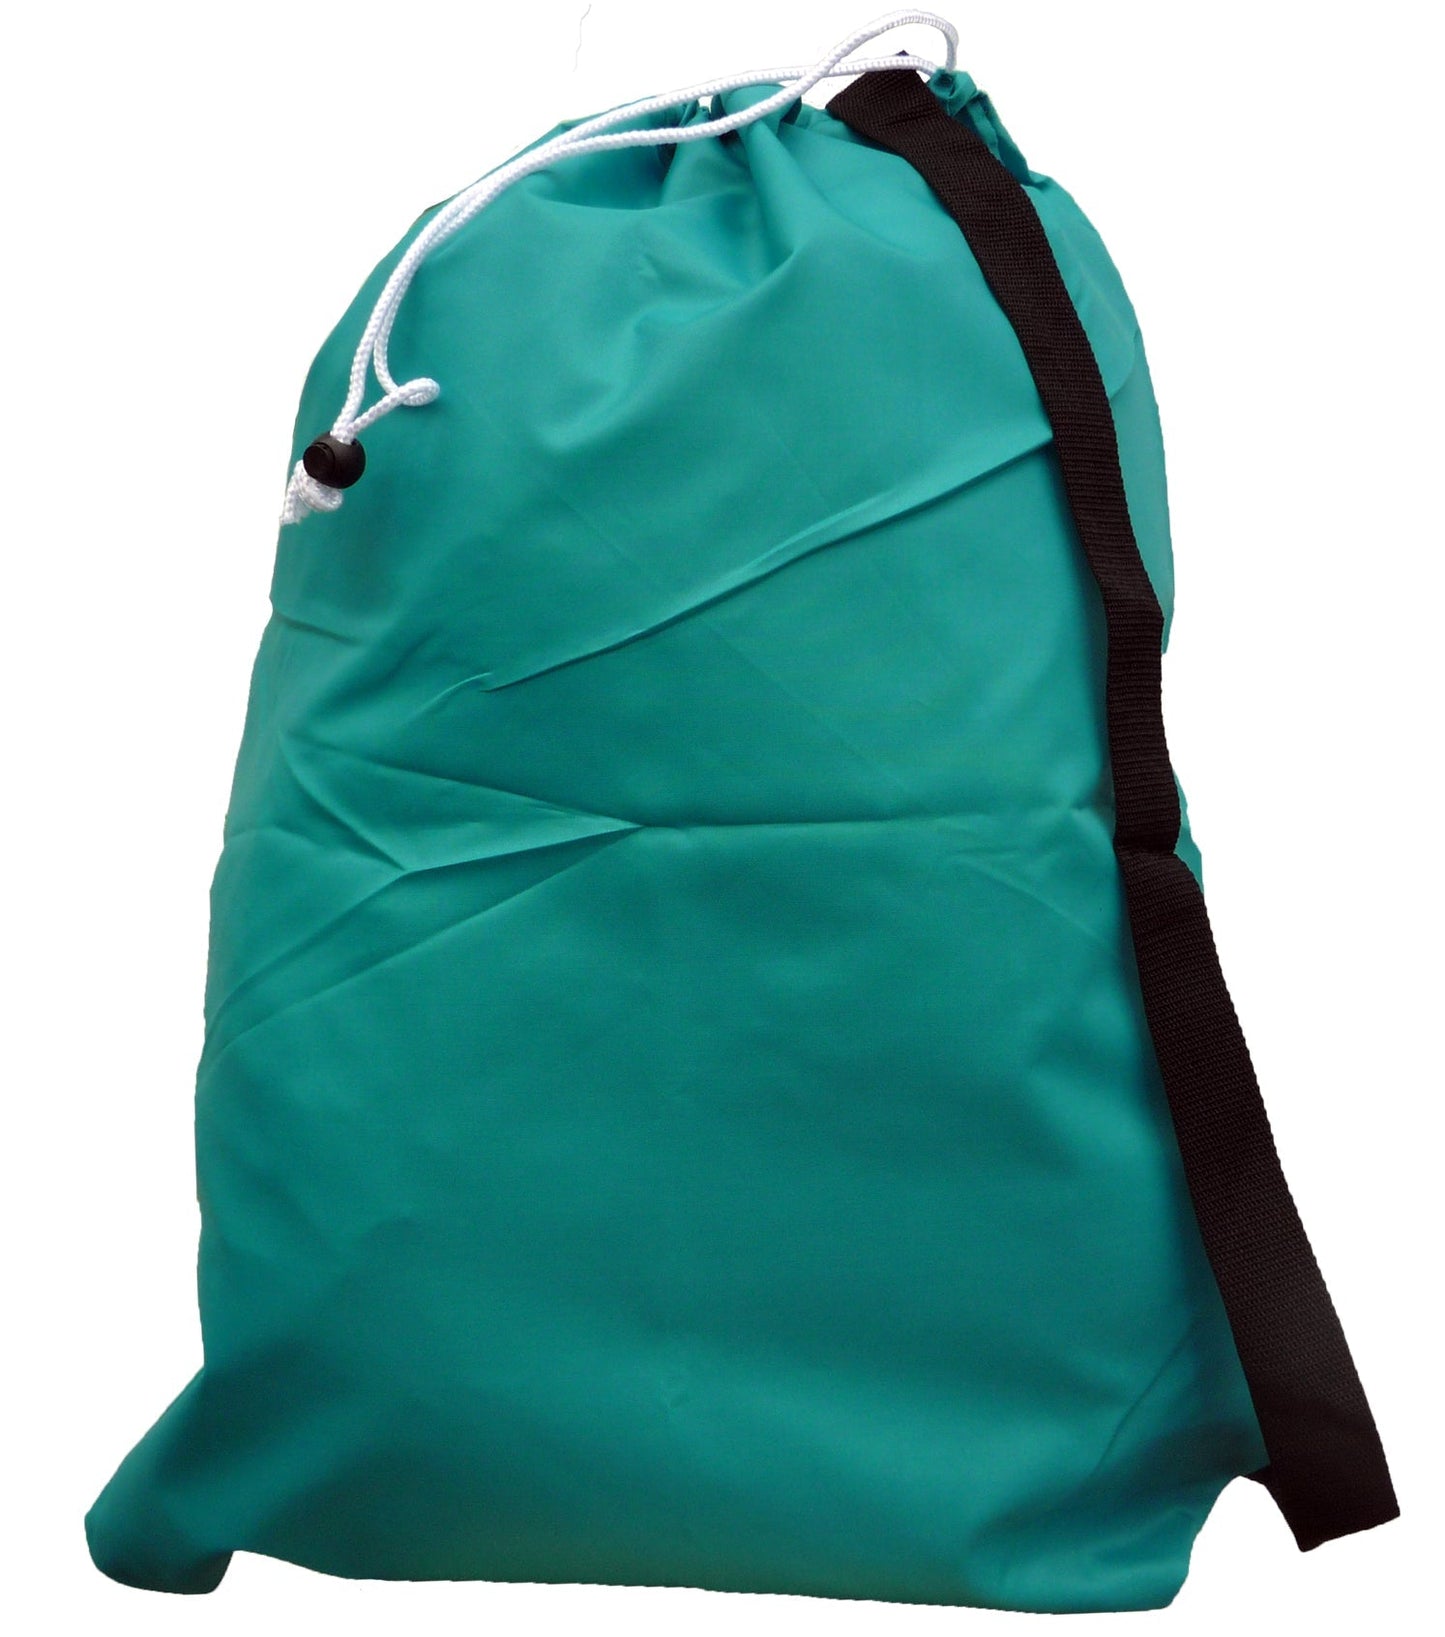 Large Laundry Bag with Strap, Teal